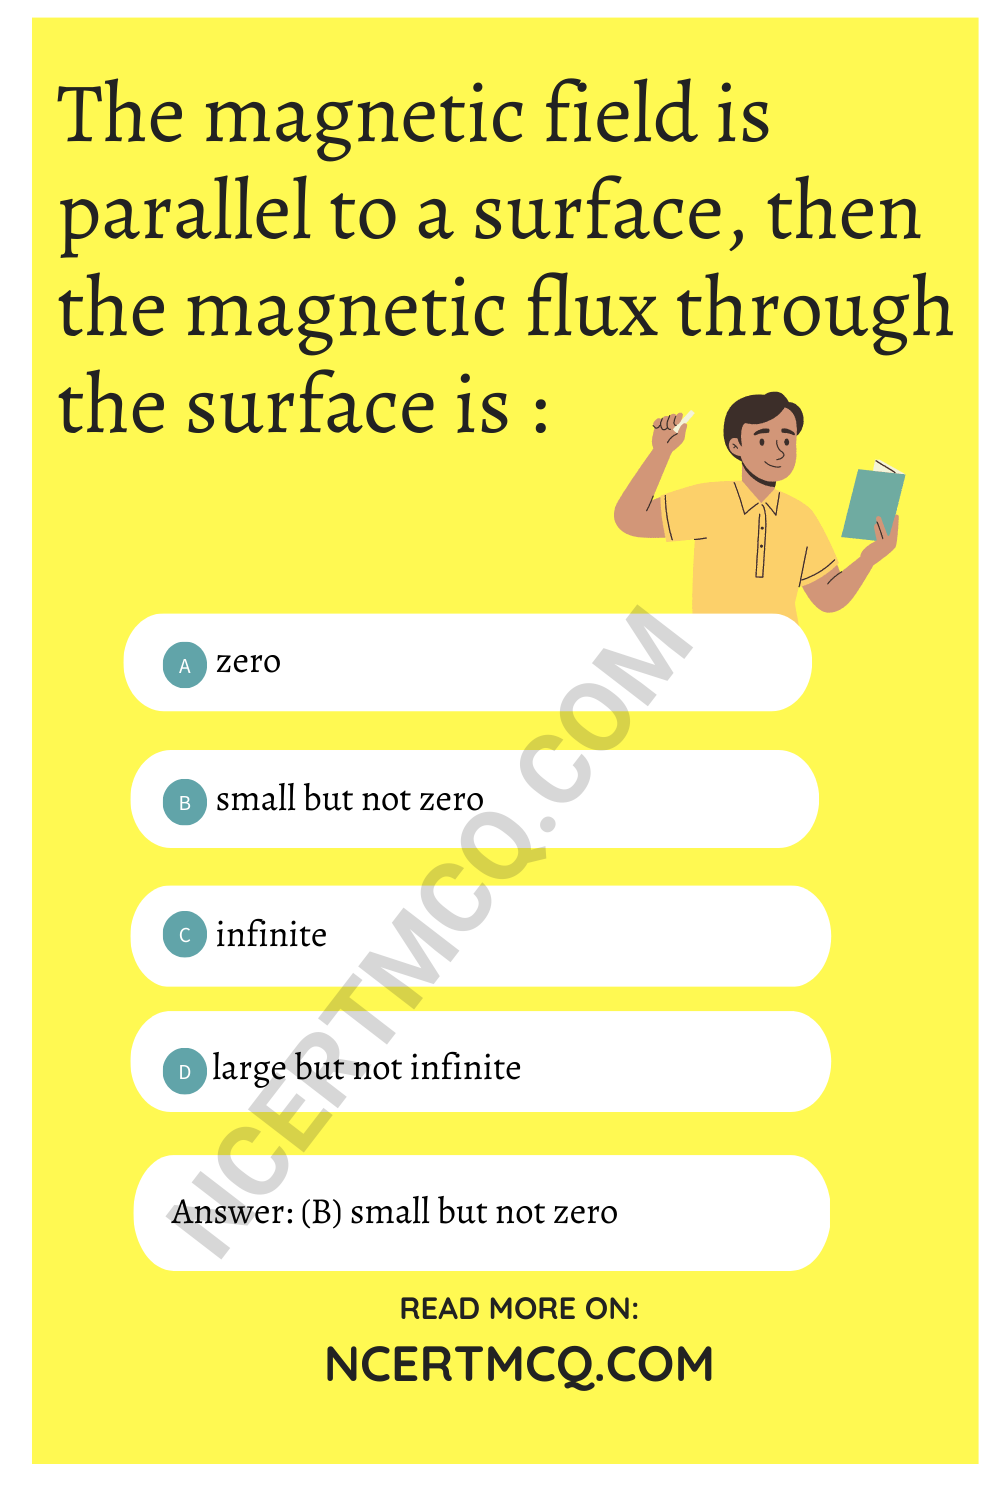 The magnetic field is parallel to a surface, then the magnetic flux through the surface is :